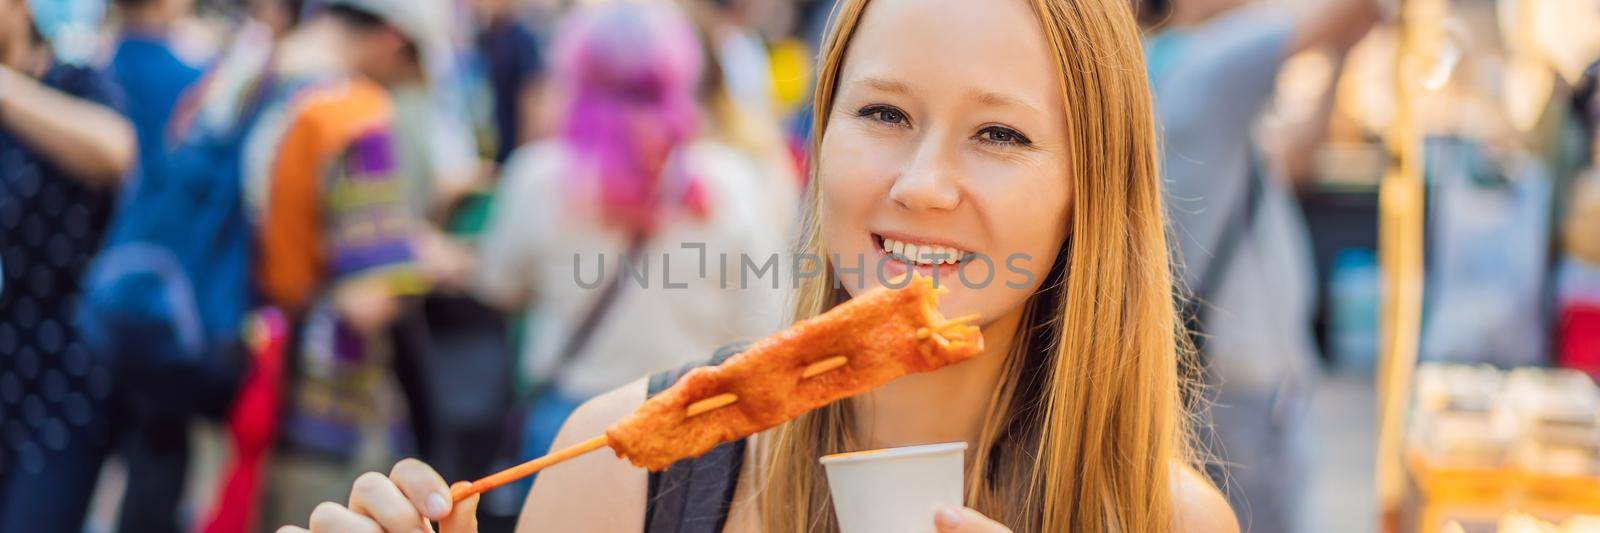 Young woman tourist eating Typical Korean street food on a walking street of Seoul. Spicy fast food simply found at local Korean martket, Soul Korea BANNER, LONG FORMAT by galitskaya